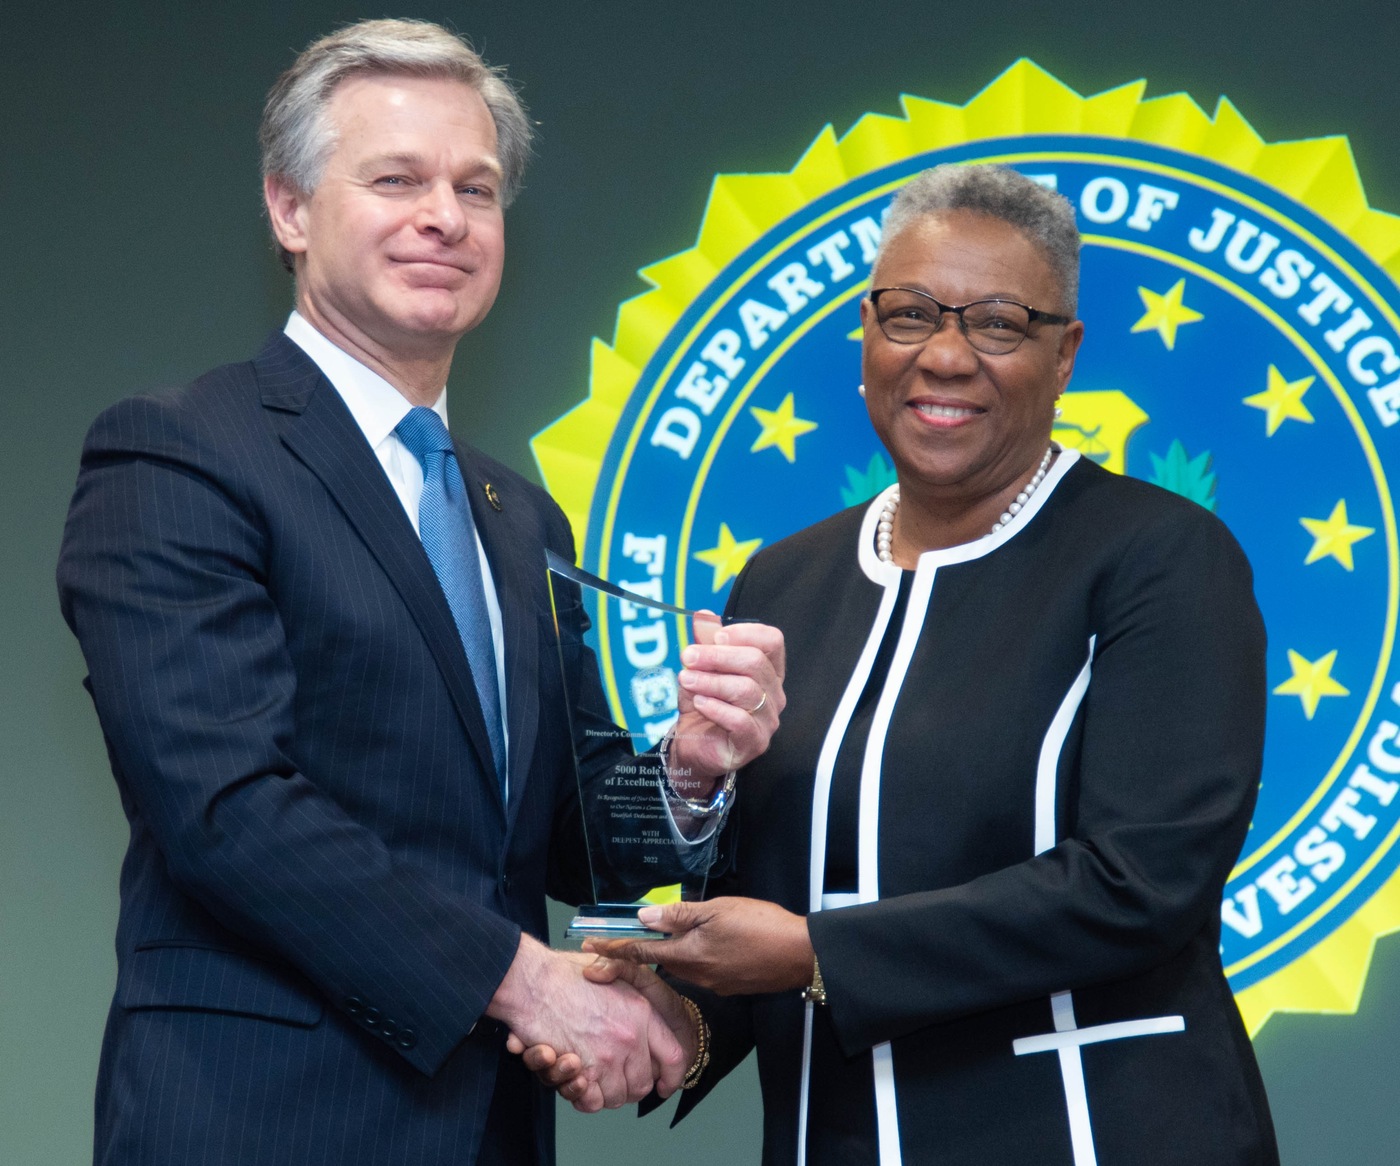 FBI Miami 2022 Director’s Community Leadership Award recipient 5000 Role Models of Excellence Project, represented by U.S. Rep. Frederica S. Wilson.